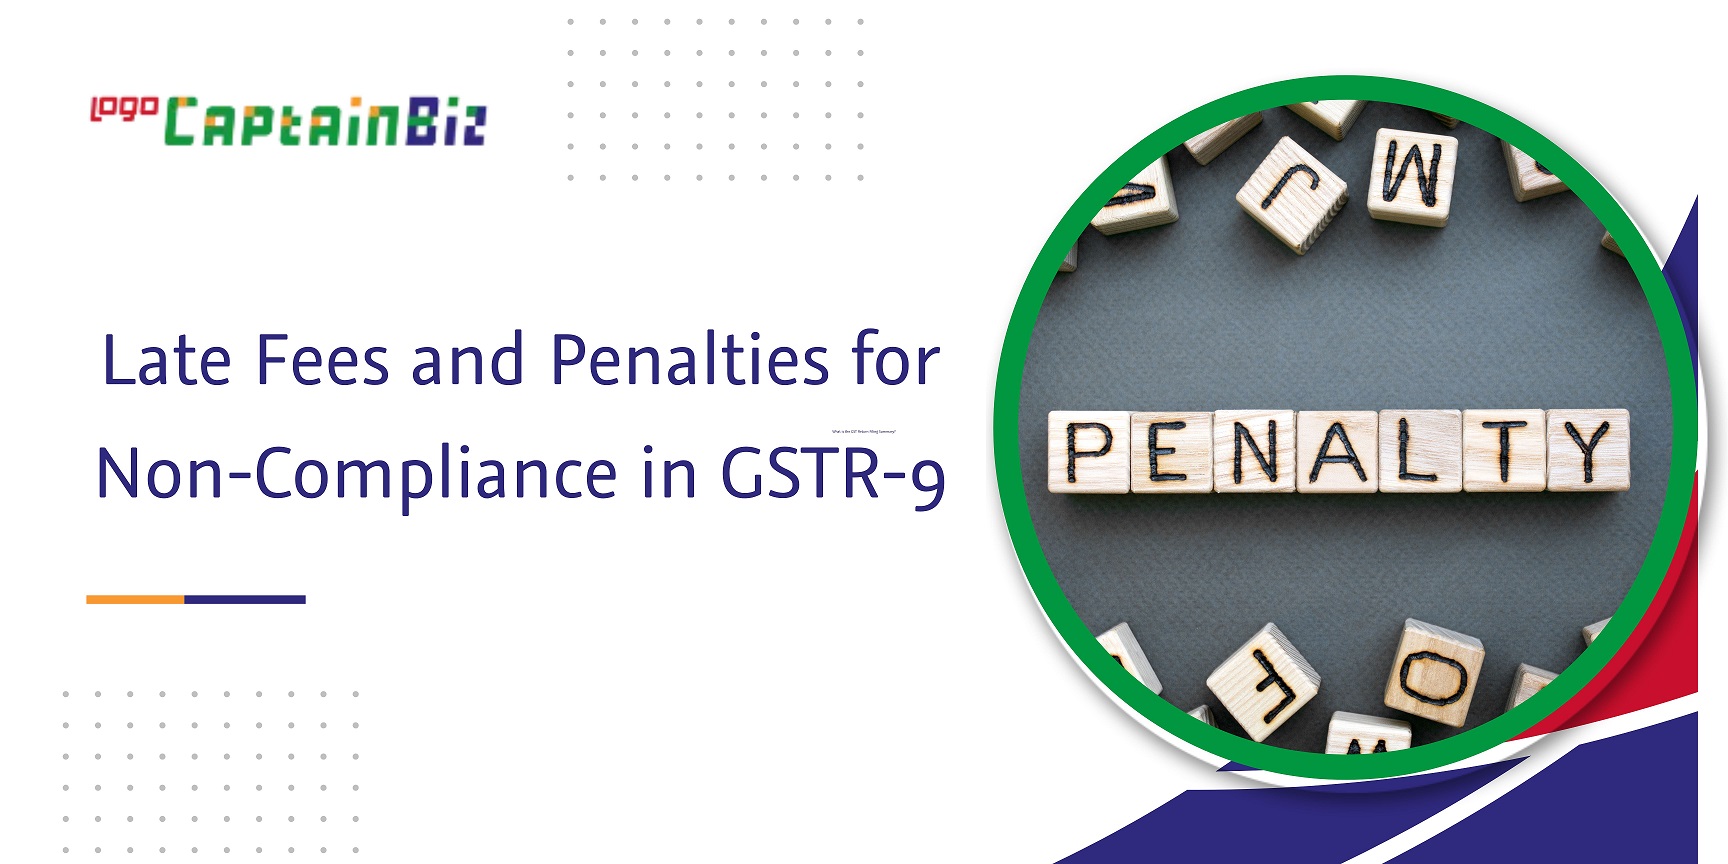 CaptainBiz: late fees and penalties for non-compliance in gstr-9